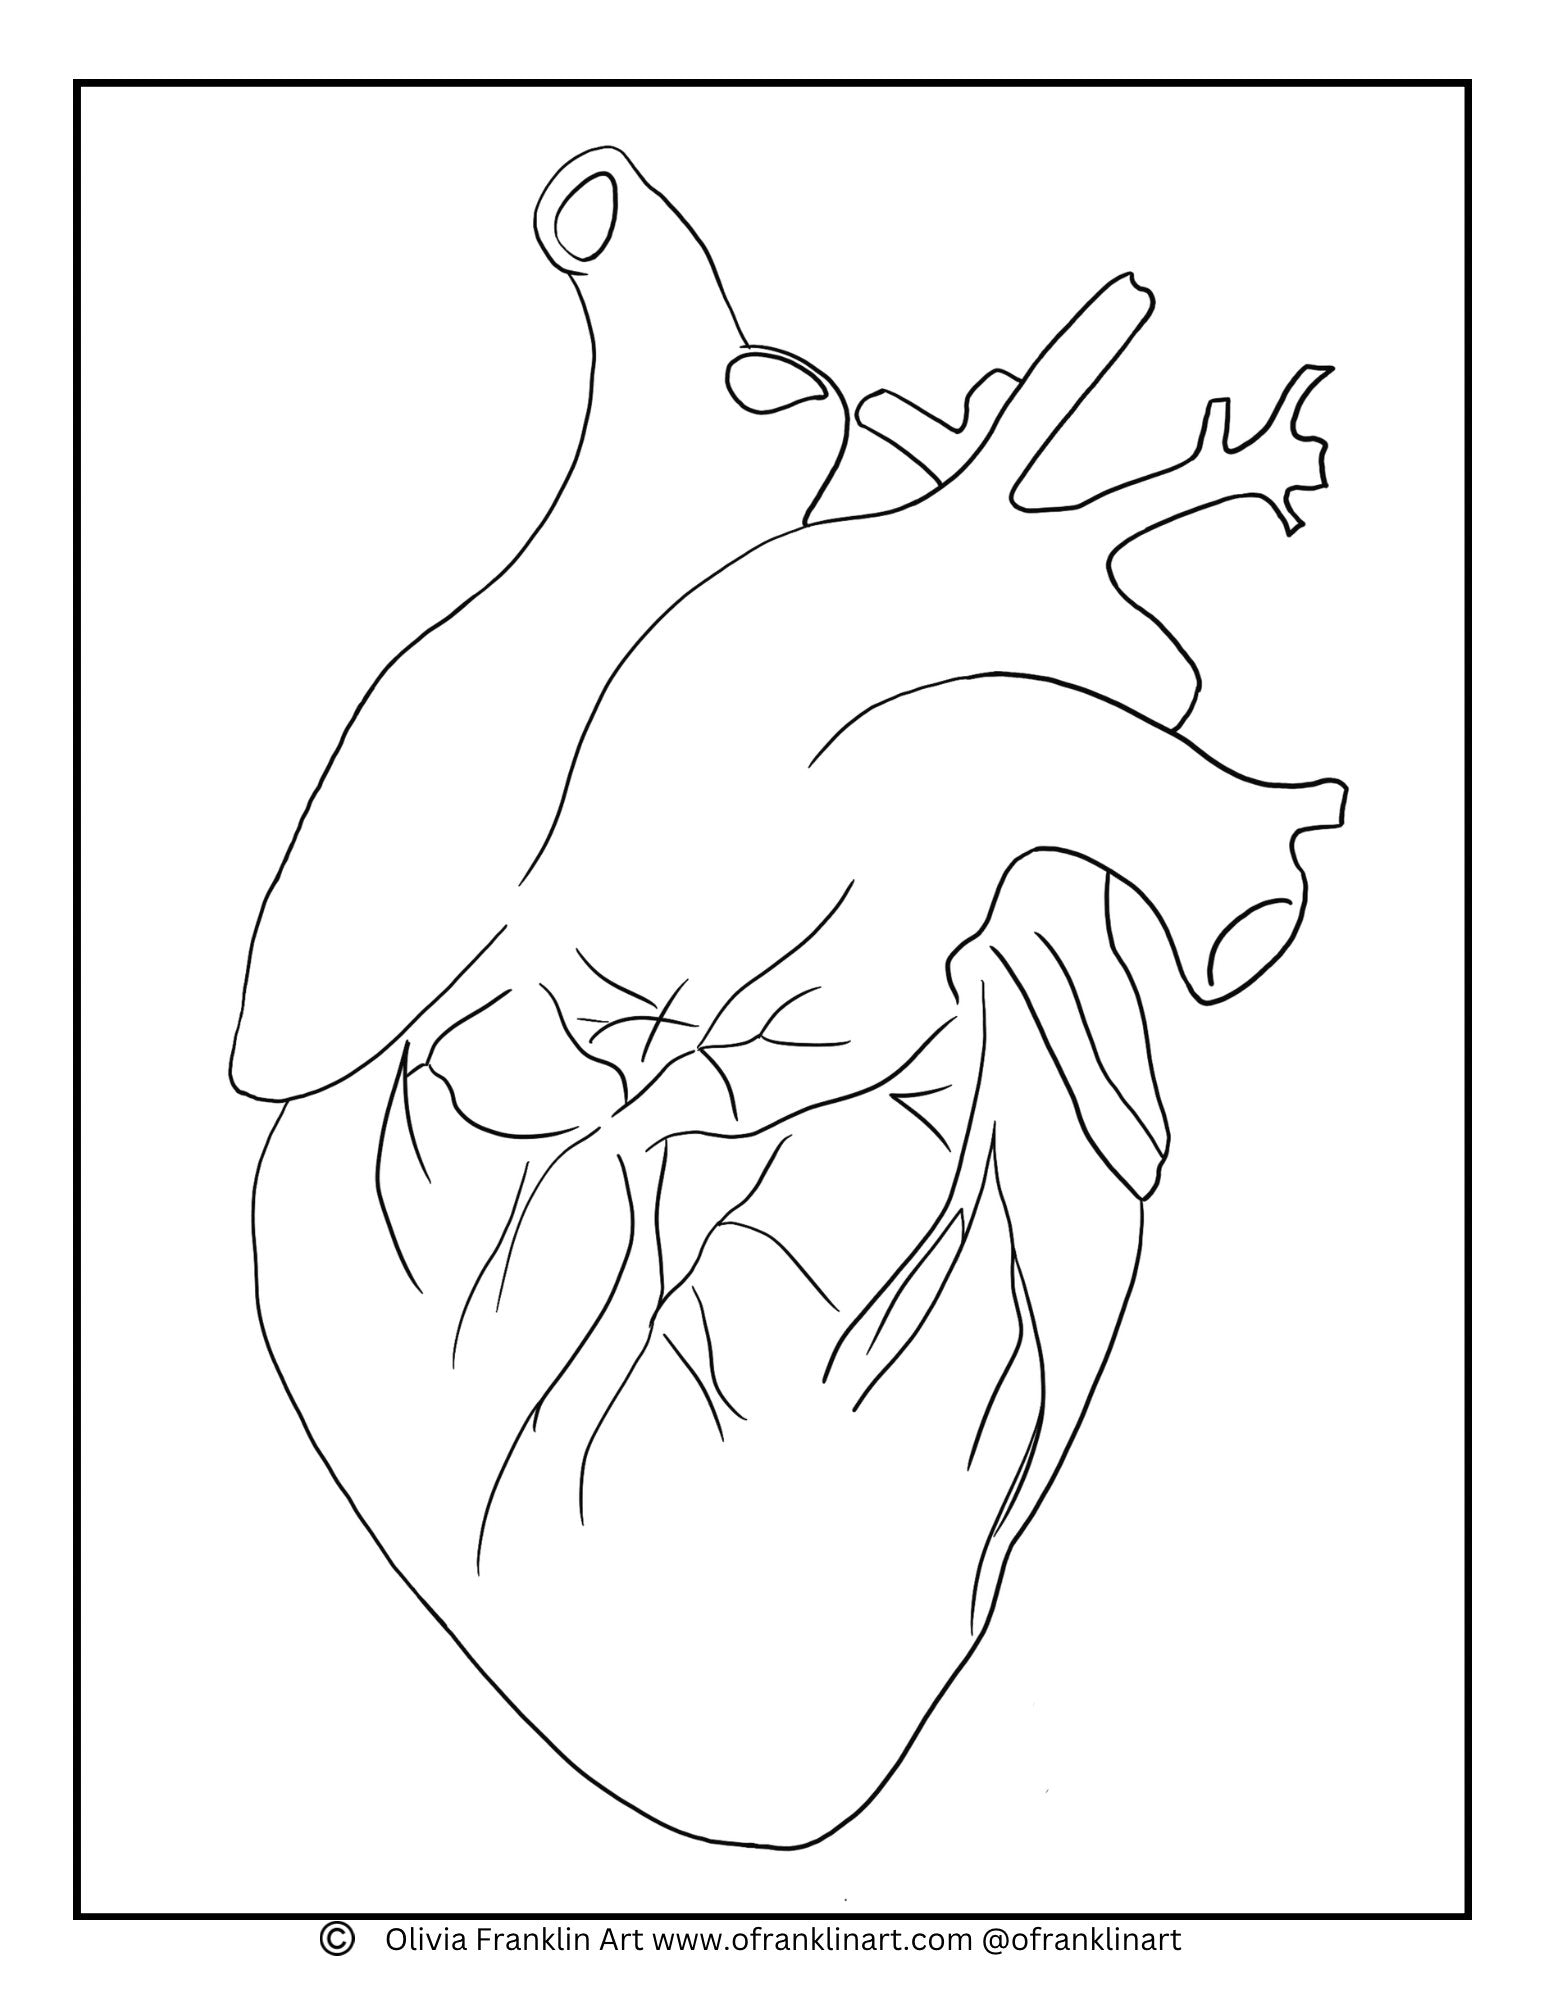 Heart Coloring Page - Olivia Franklin Art